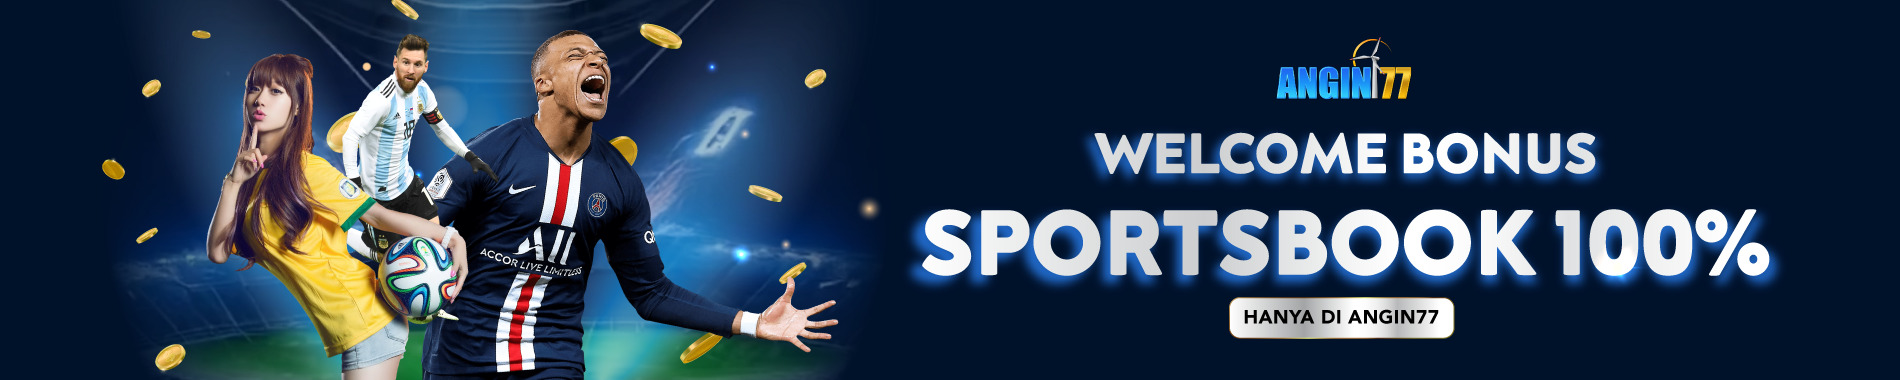 welcome sportsbook up to 100% angin77